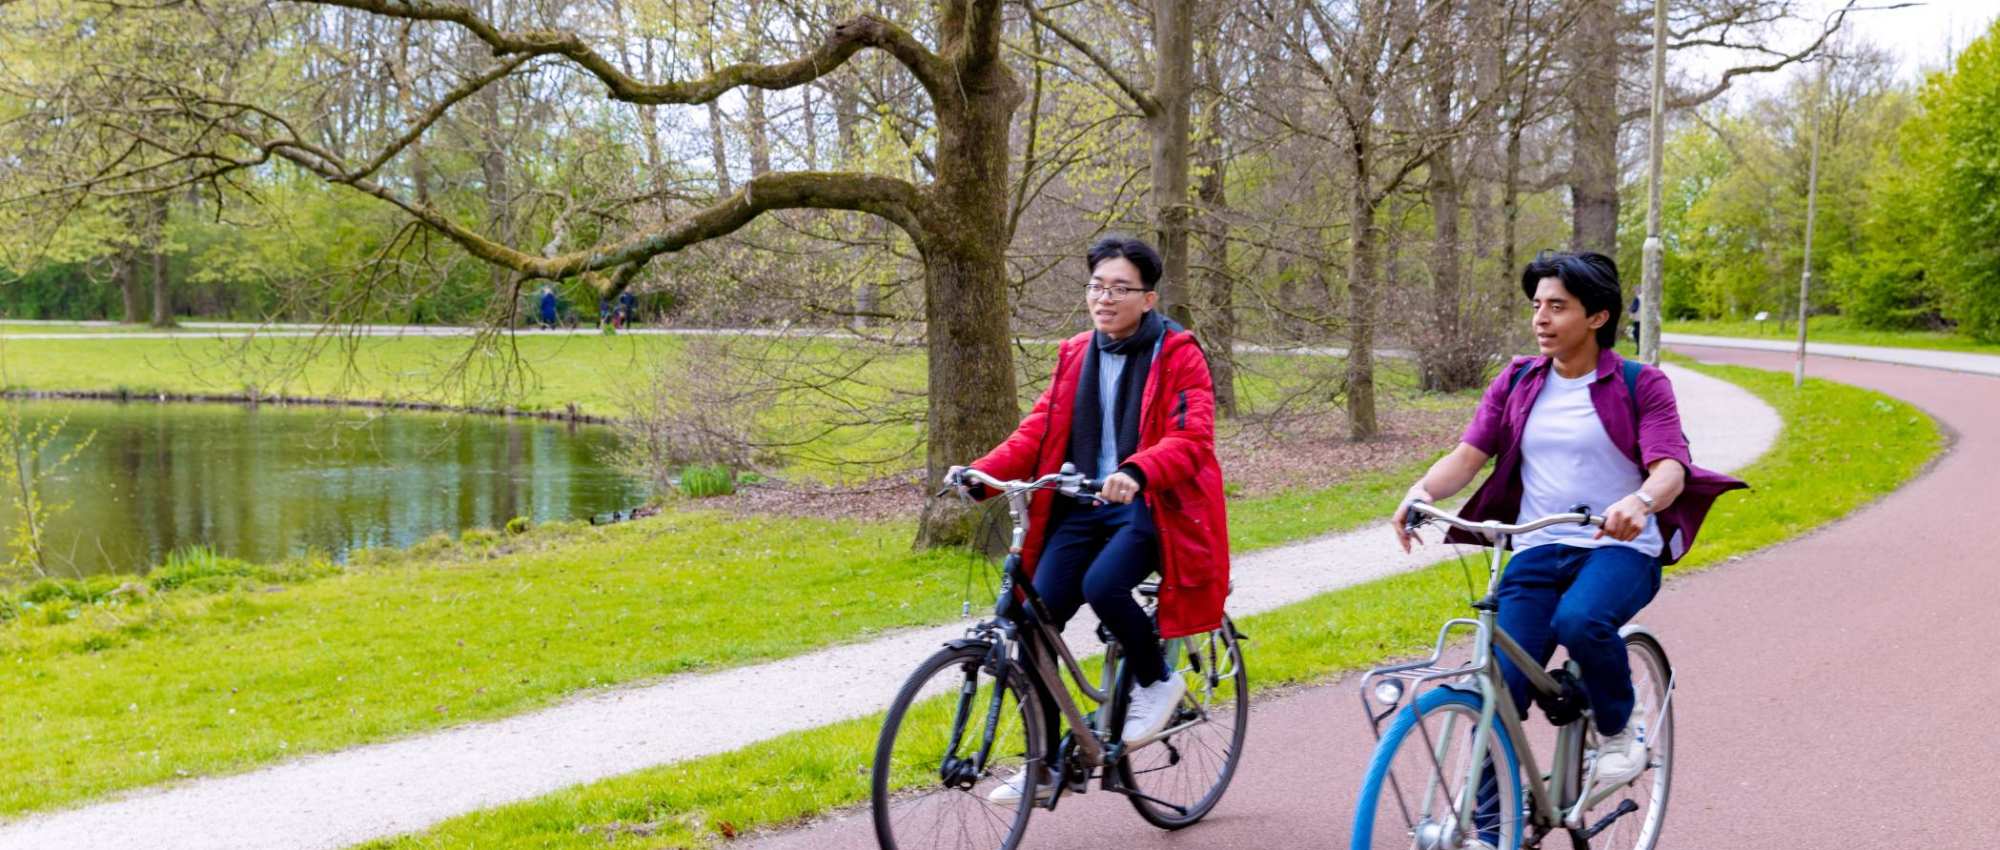 Diego and Nyugen riding their bikes on the bicycle road in the park.